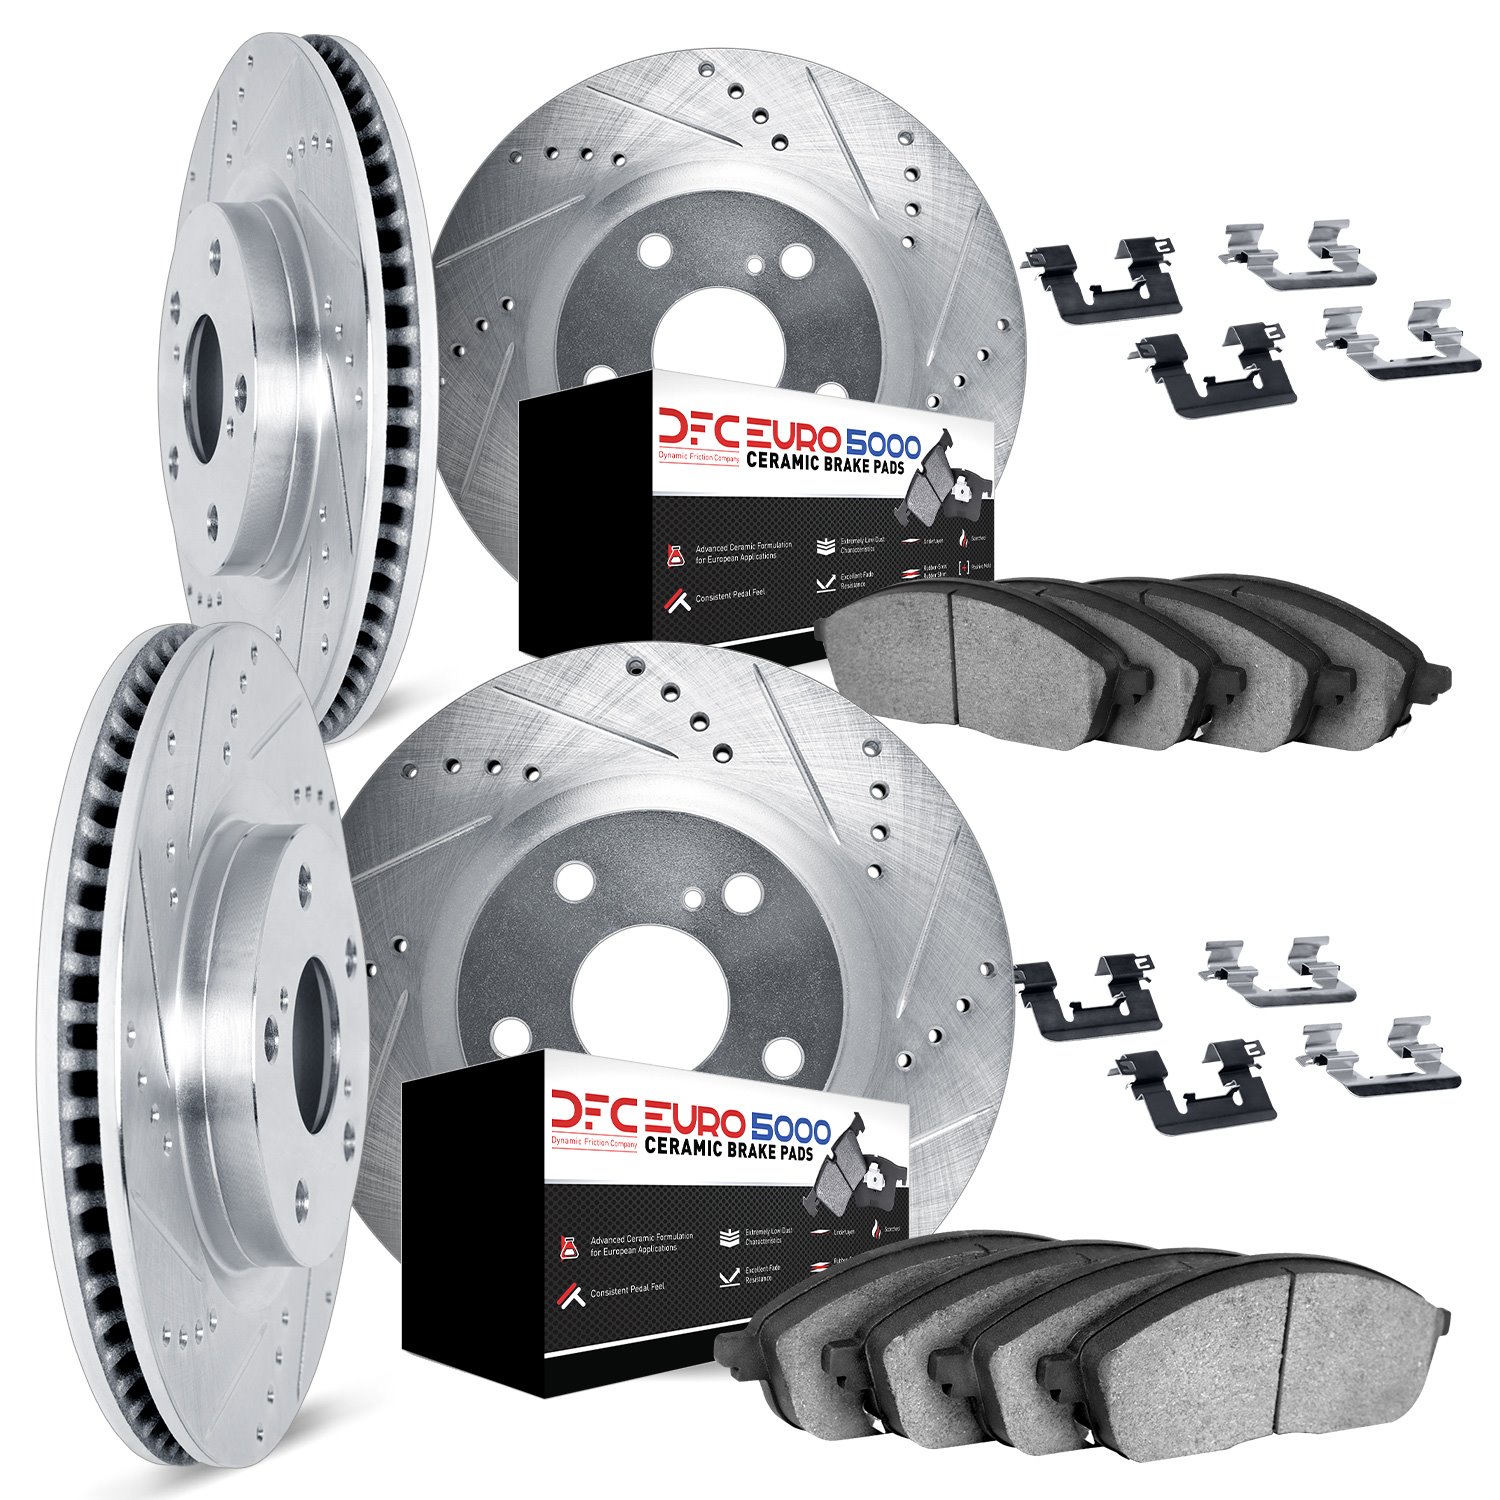 7614-31013 Drilled/Slotted Brake Rotors w/5000 Euro Ceramic Brake Pads Kit & Hardware [Silver], 1995-2002 BMW, Position: Front a